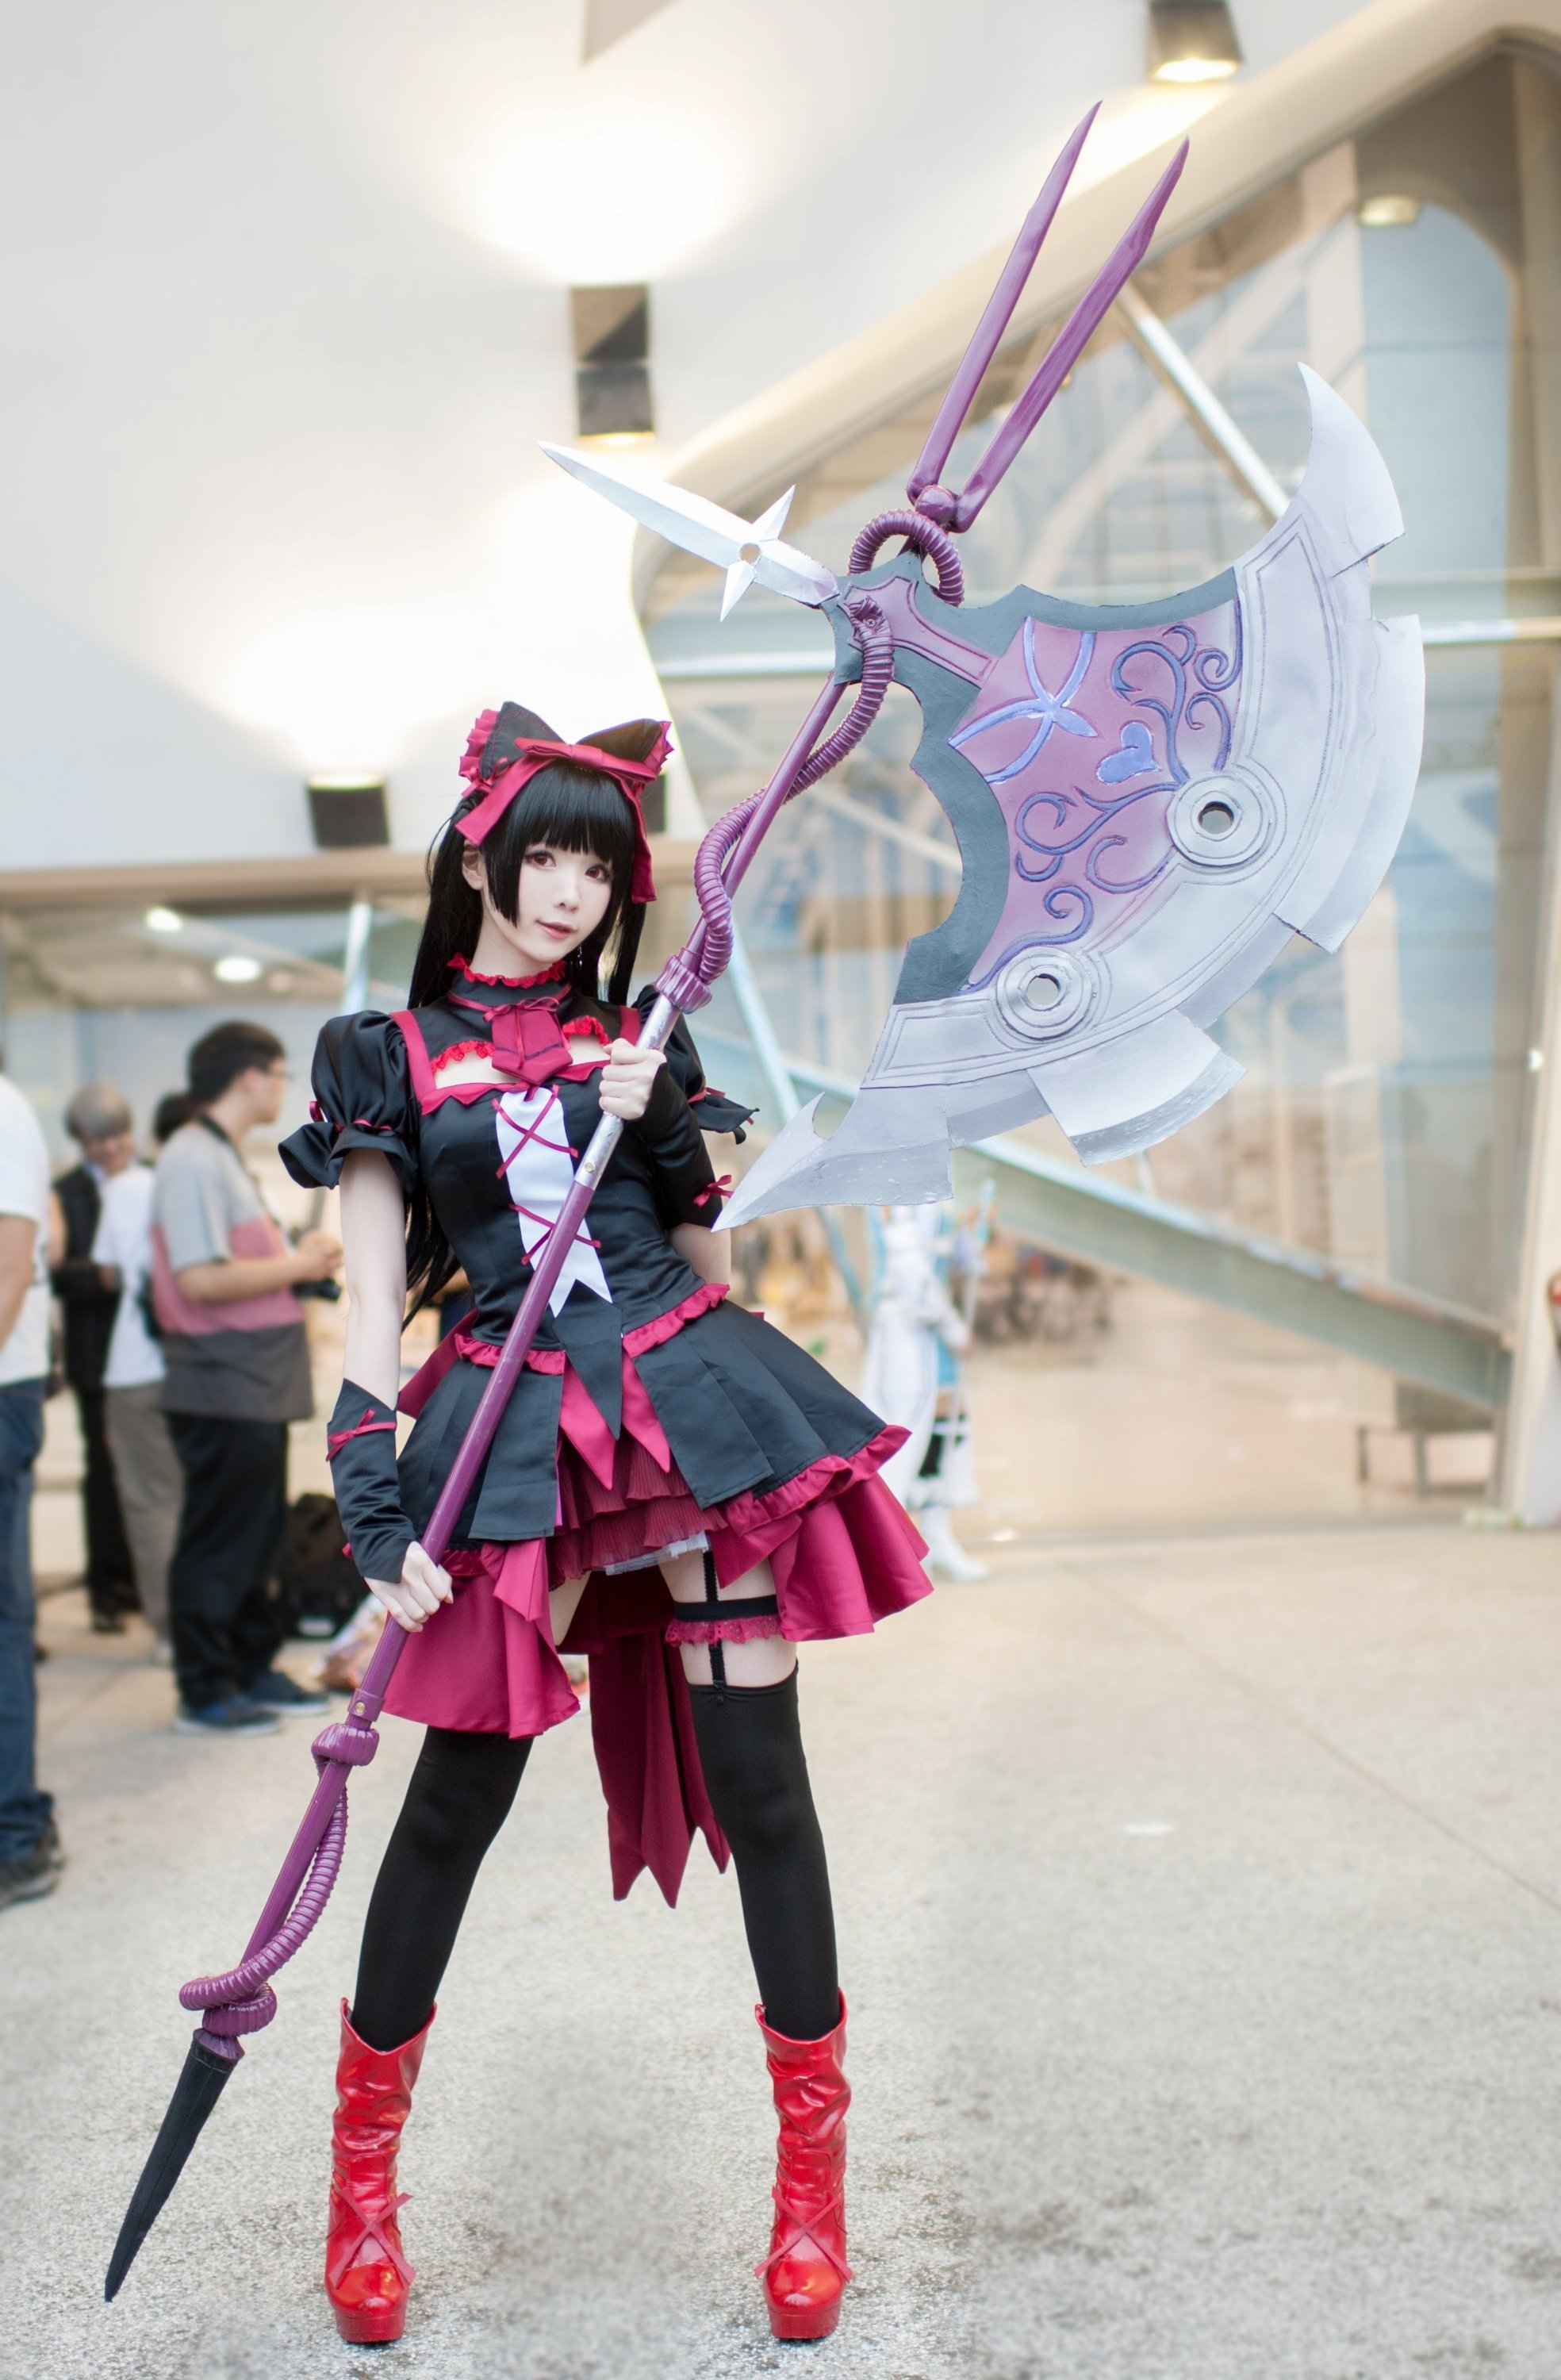 10 Most Recommended Anime Cosplay Ideas For Girls 2020